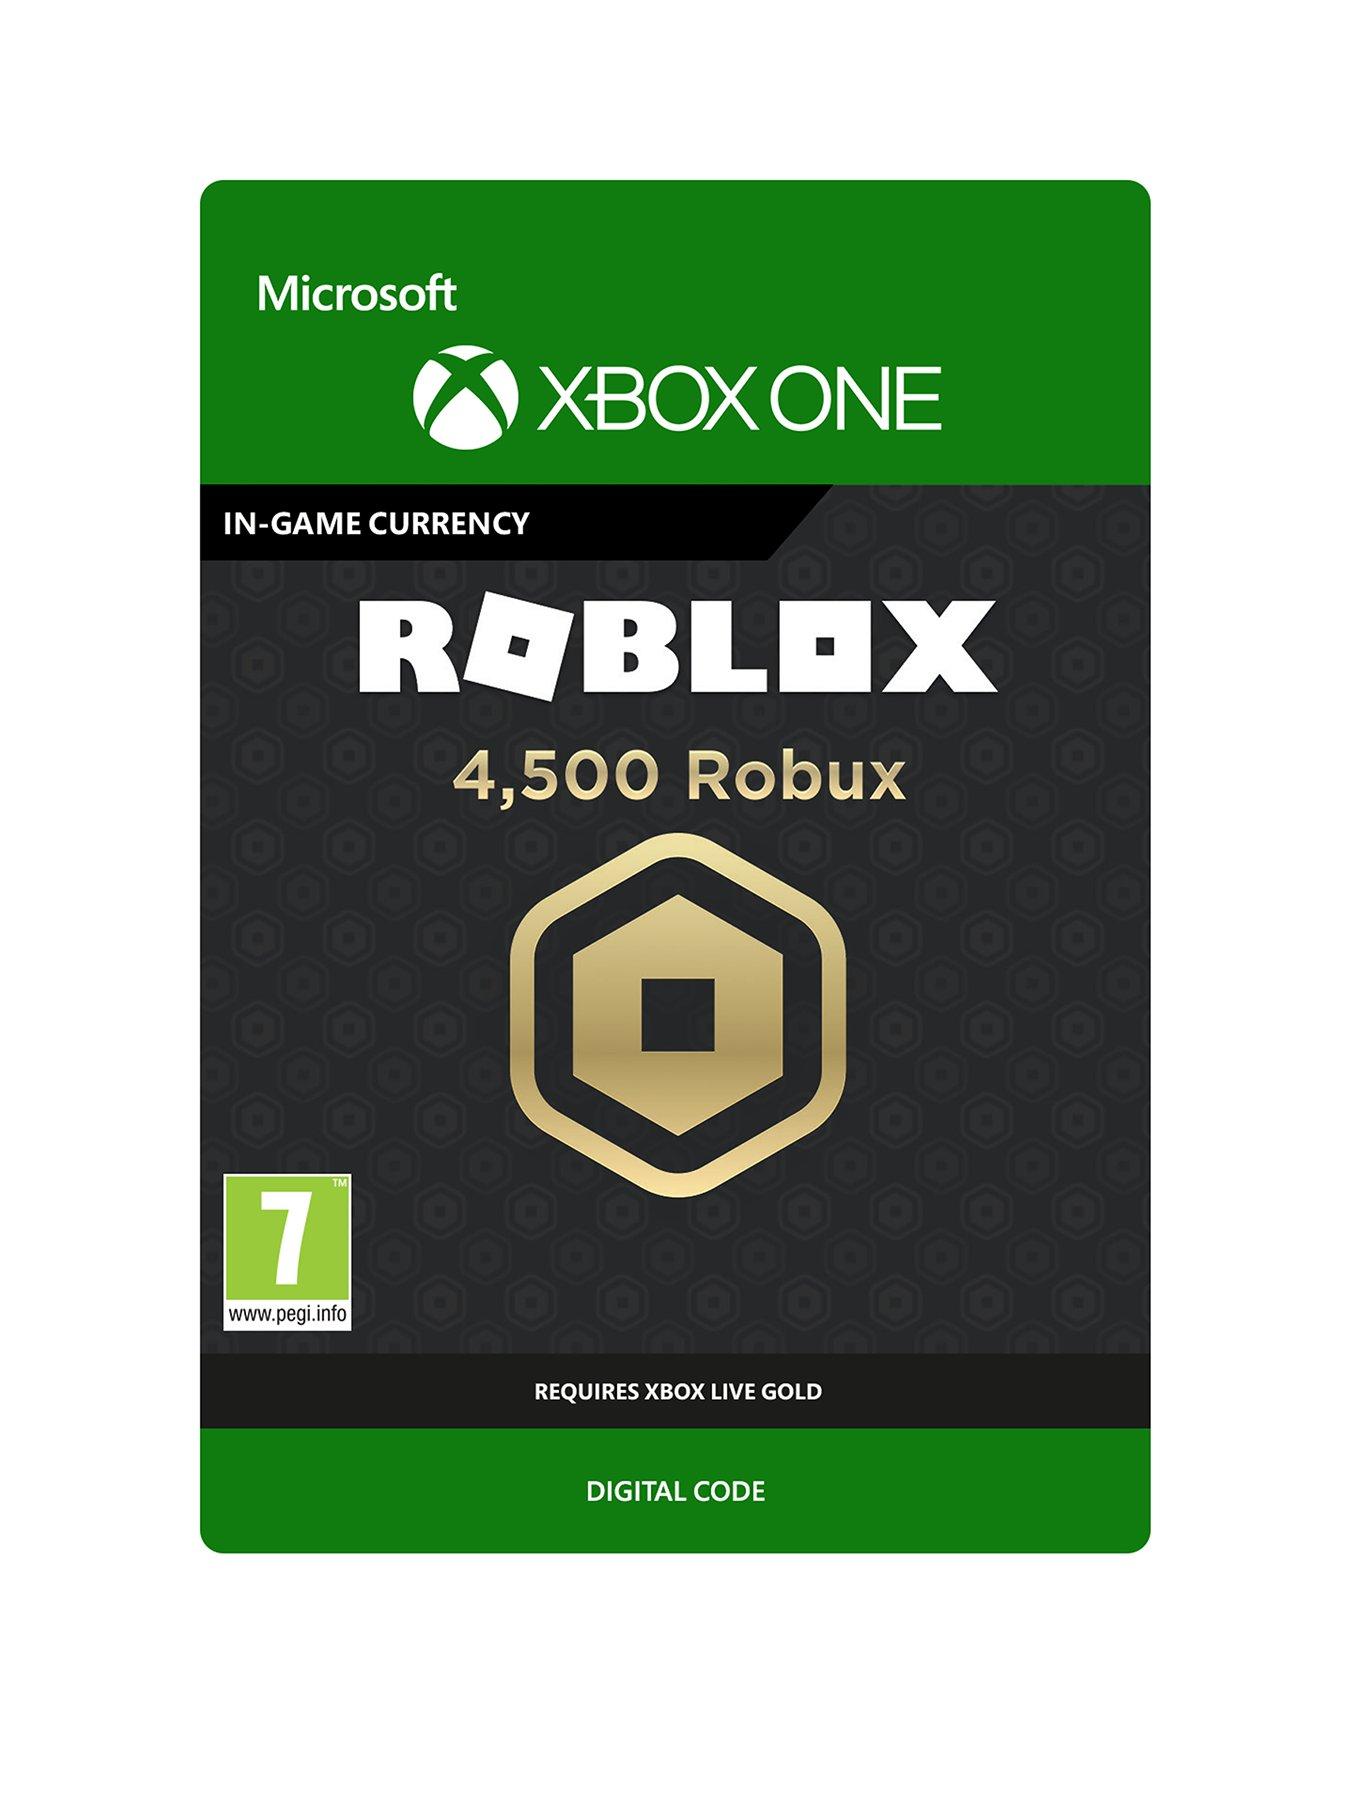 Digital Games Latest Digital Download Games Very Co Uk - roblox guest world ring get 1 robux